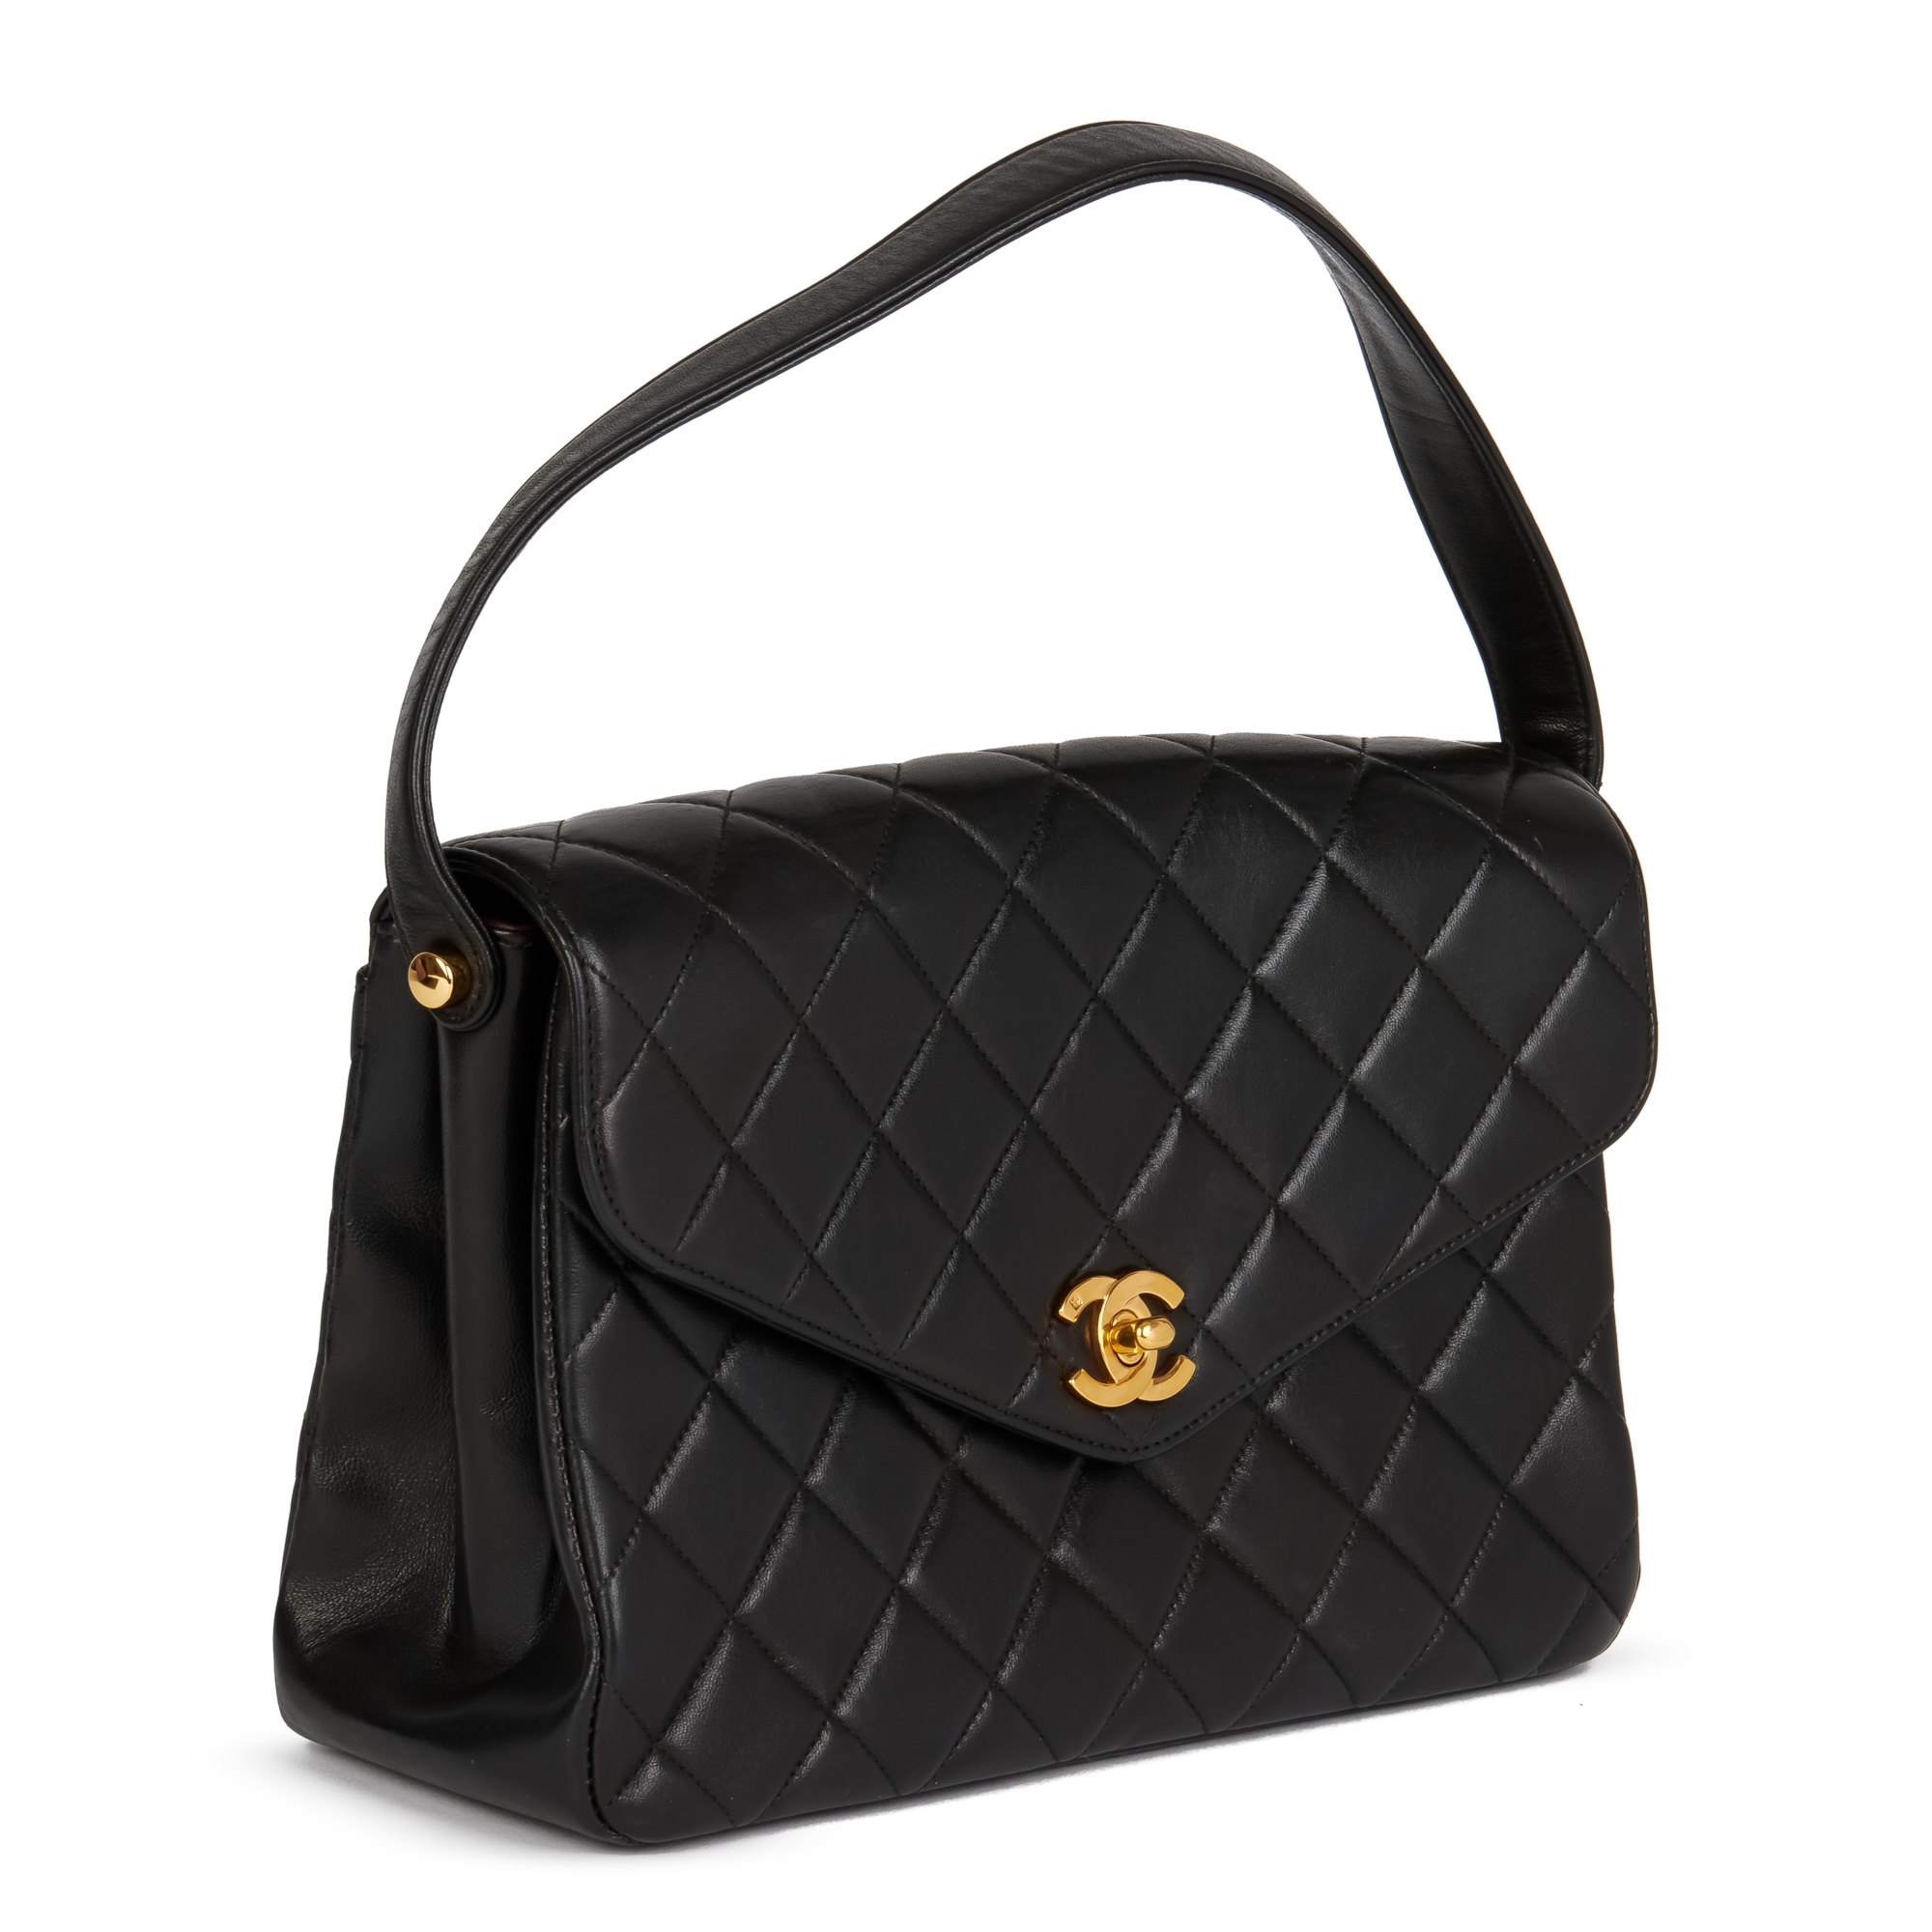 Chanel Black Quilted Lambskin Vintage Medium Classic Top Handle Flap Bag